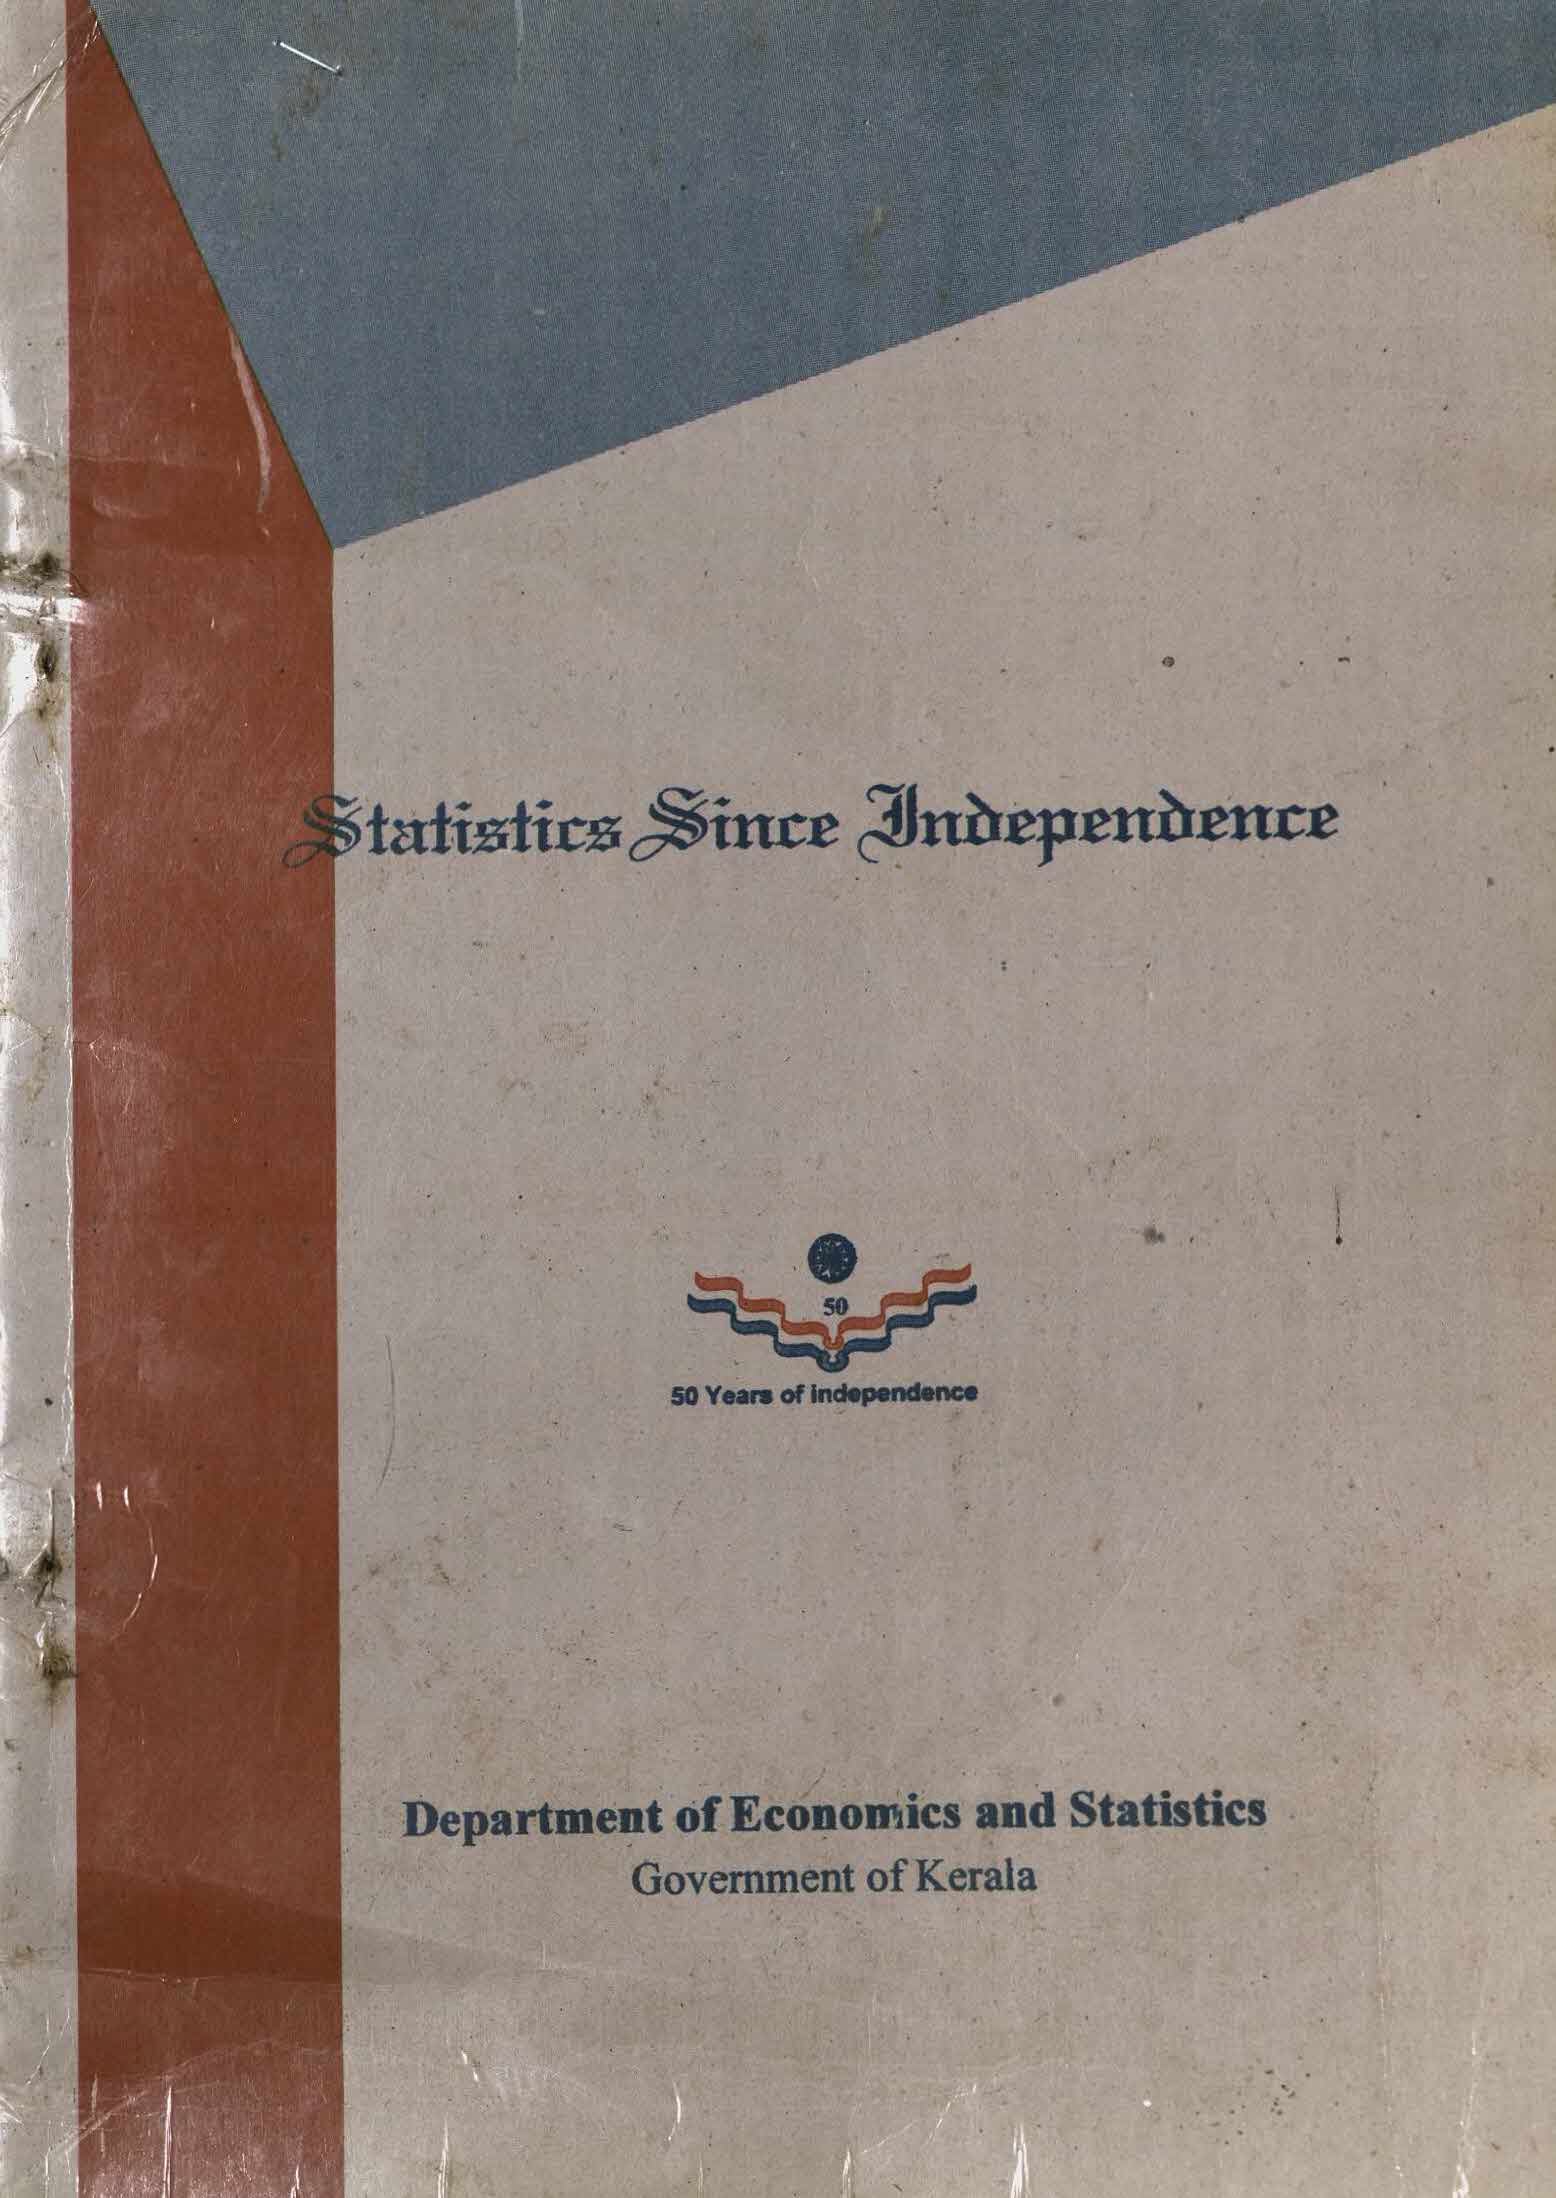 STATISTICS SINCE INDEPENDENCE